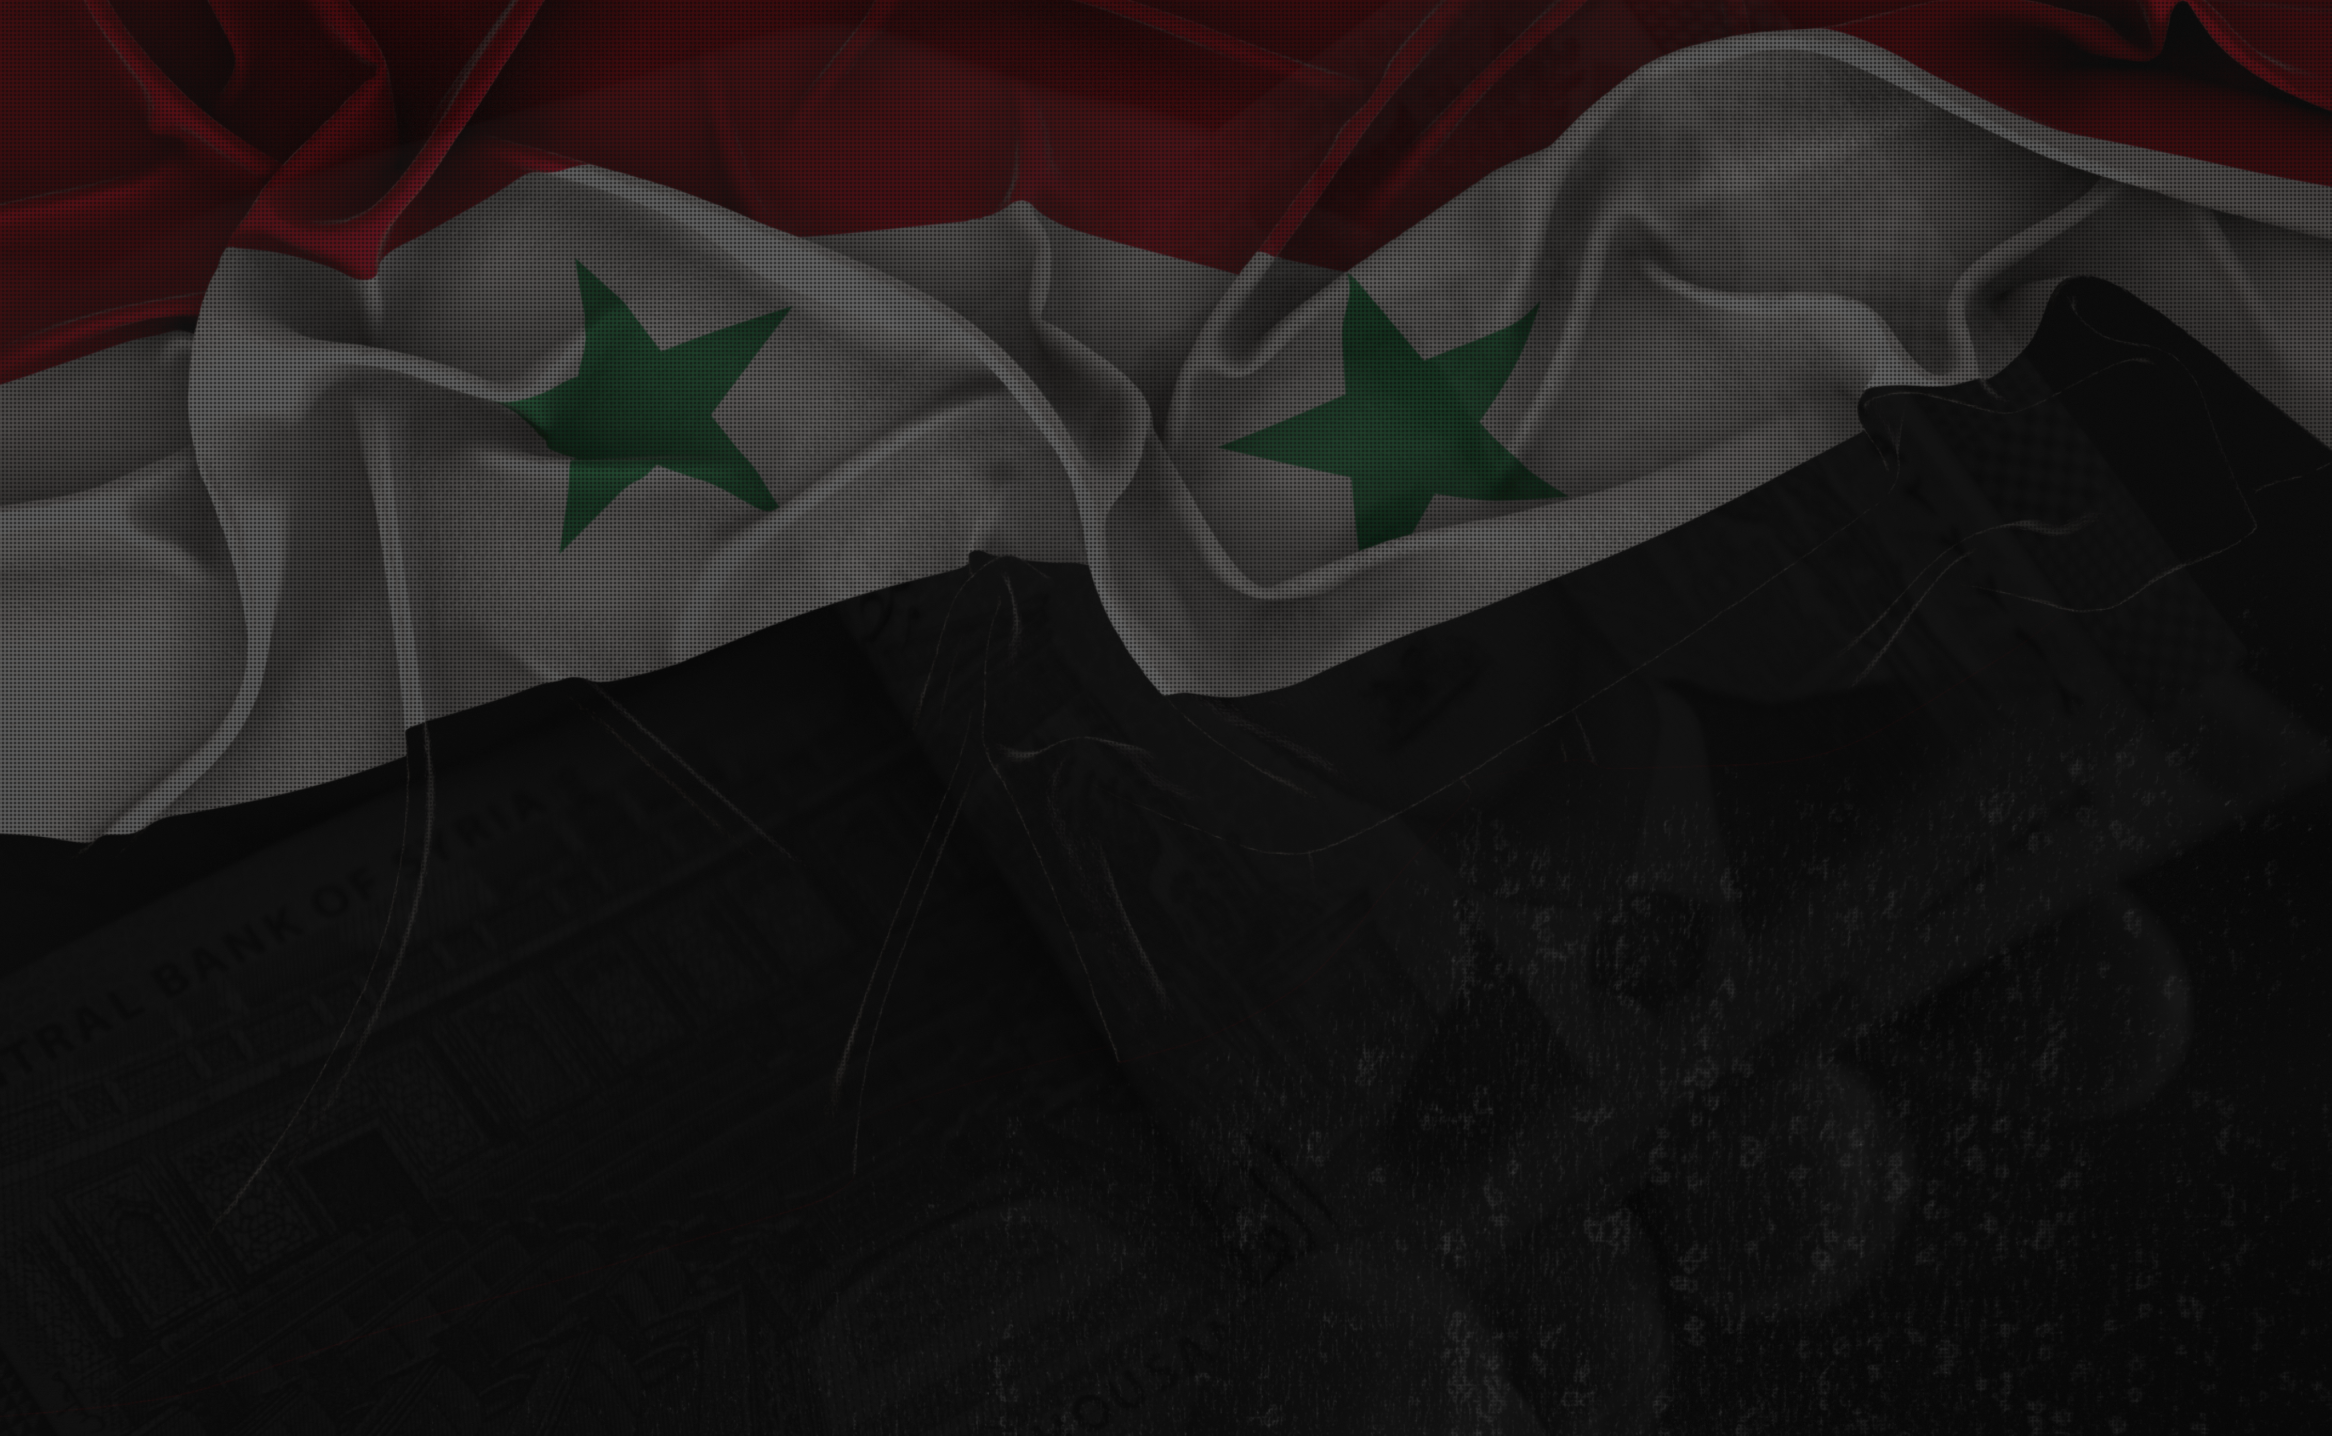 Companies Funding the Syrian Regime Operate Freely in Britain through Lebanon